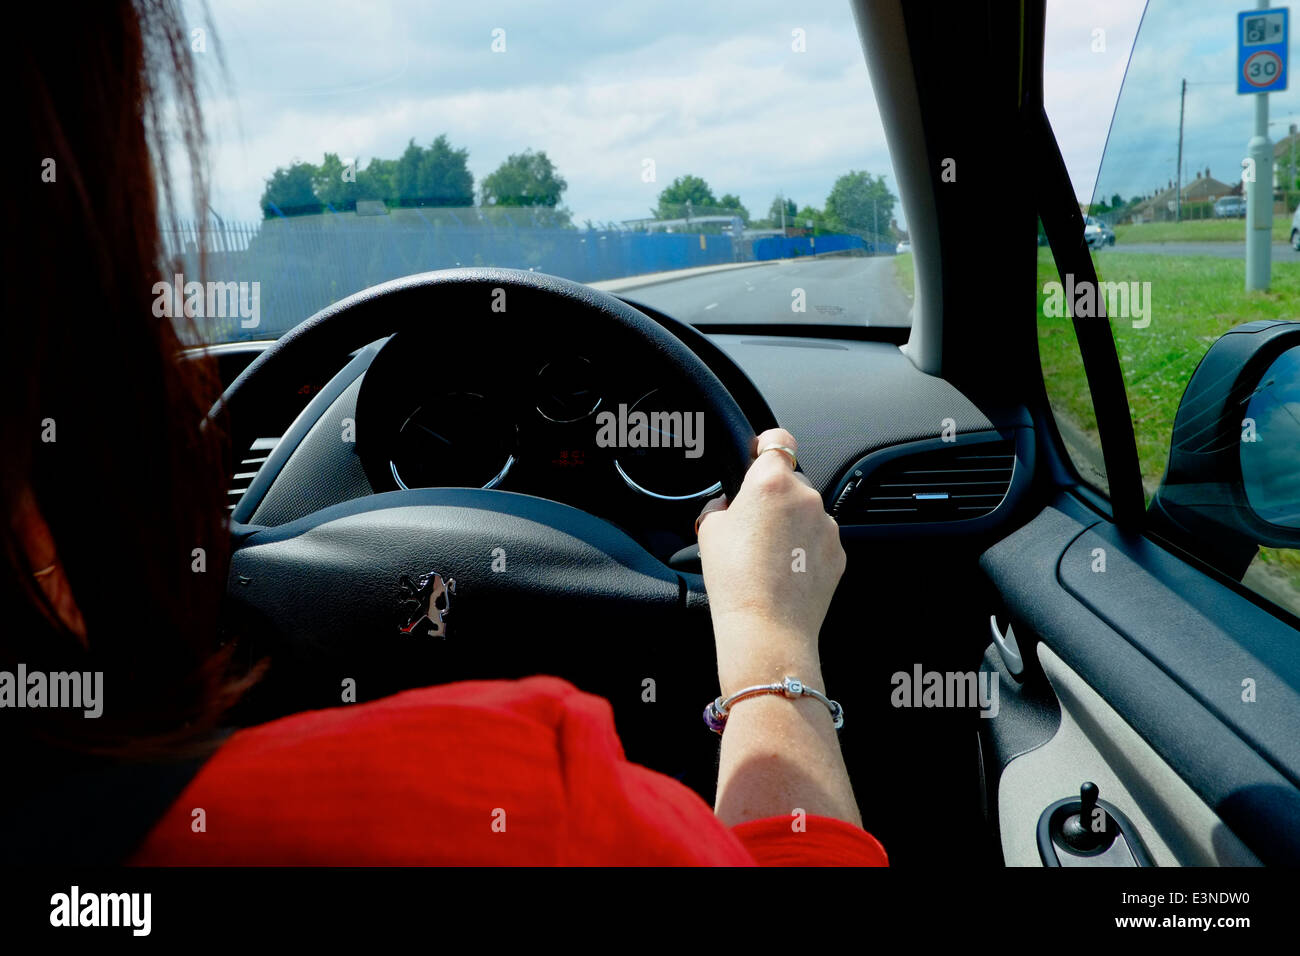 A female driving a car showing her right hand on the steering wheel England UK Stock Photo